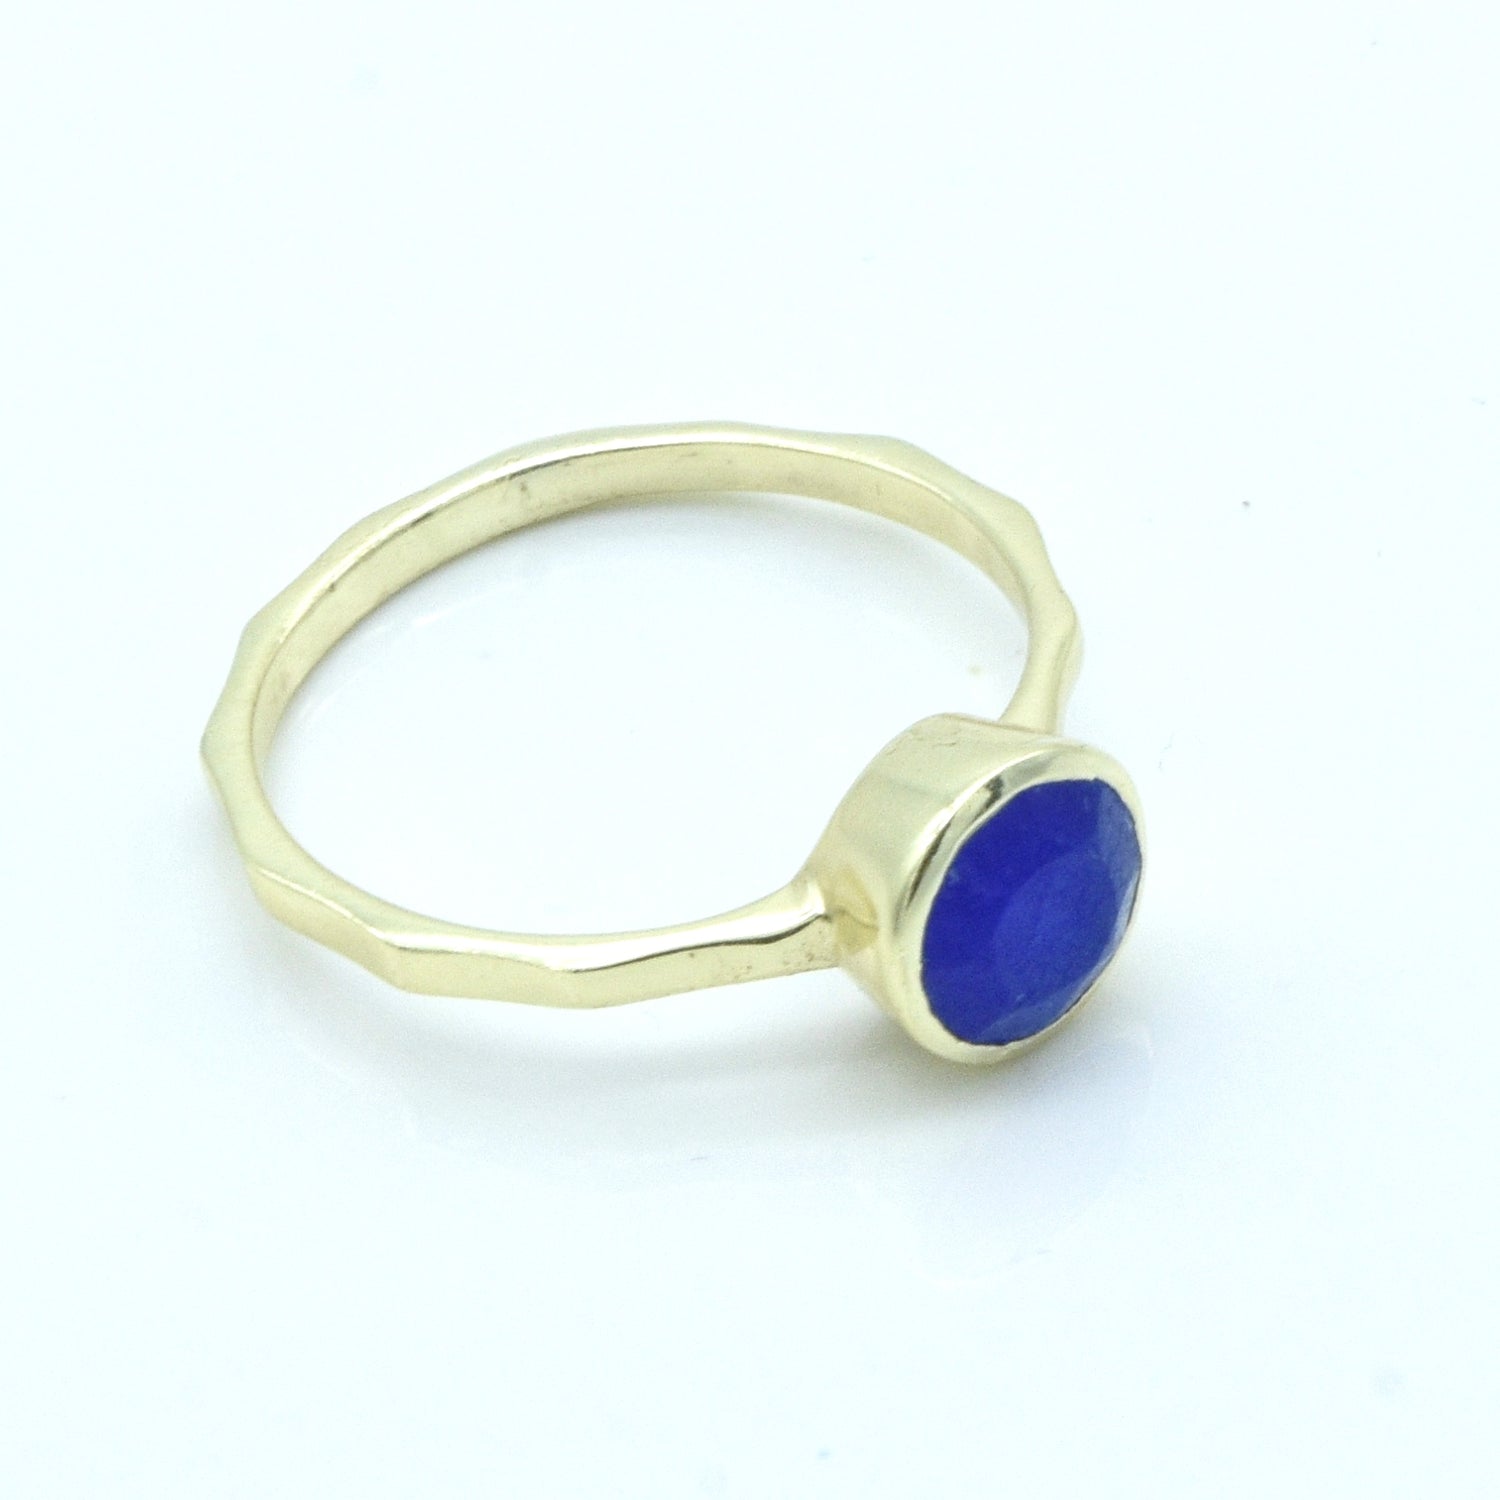 Aylas Agate ring - 21ct Gold plated brass - Handmade in Ottoman Style by Artisan